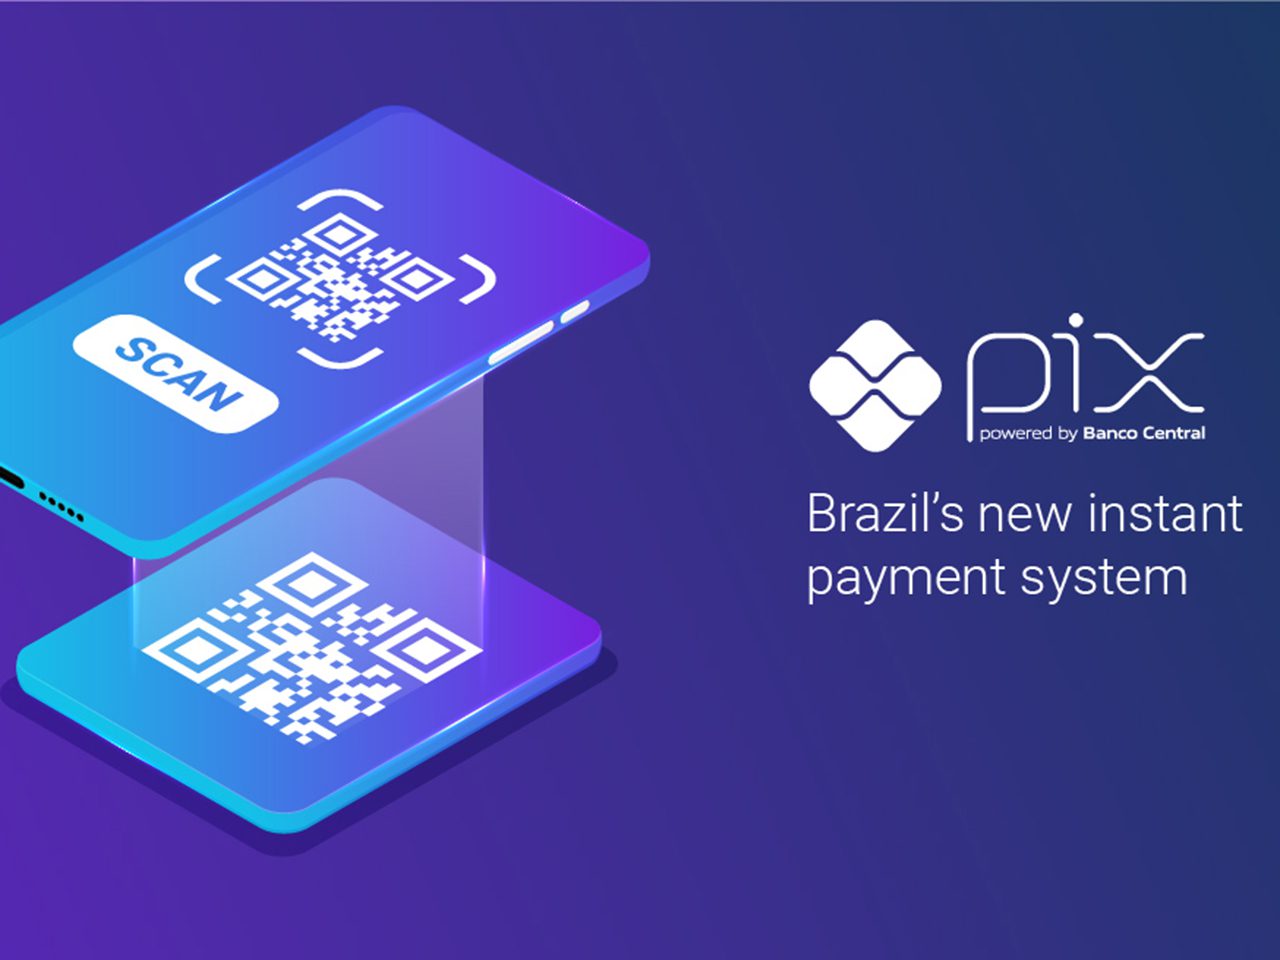 How PIX became a LatAm payments phenomenon in just one year